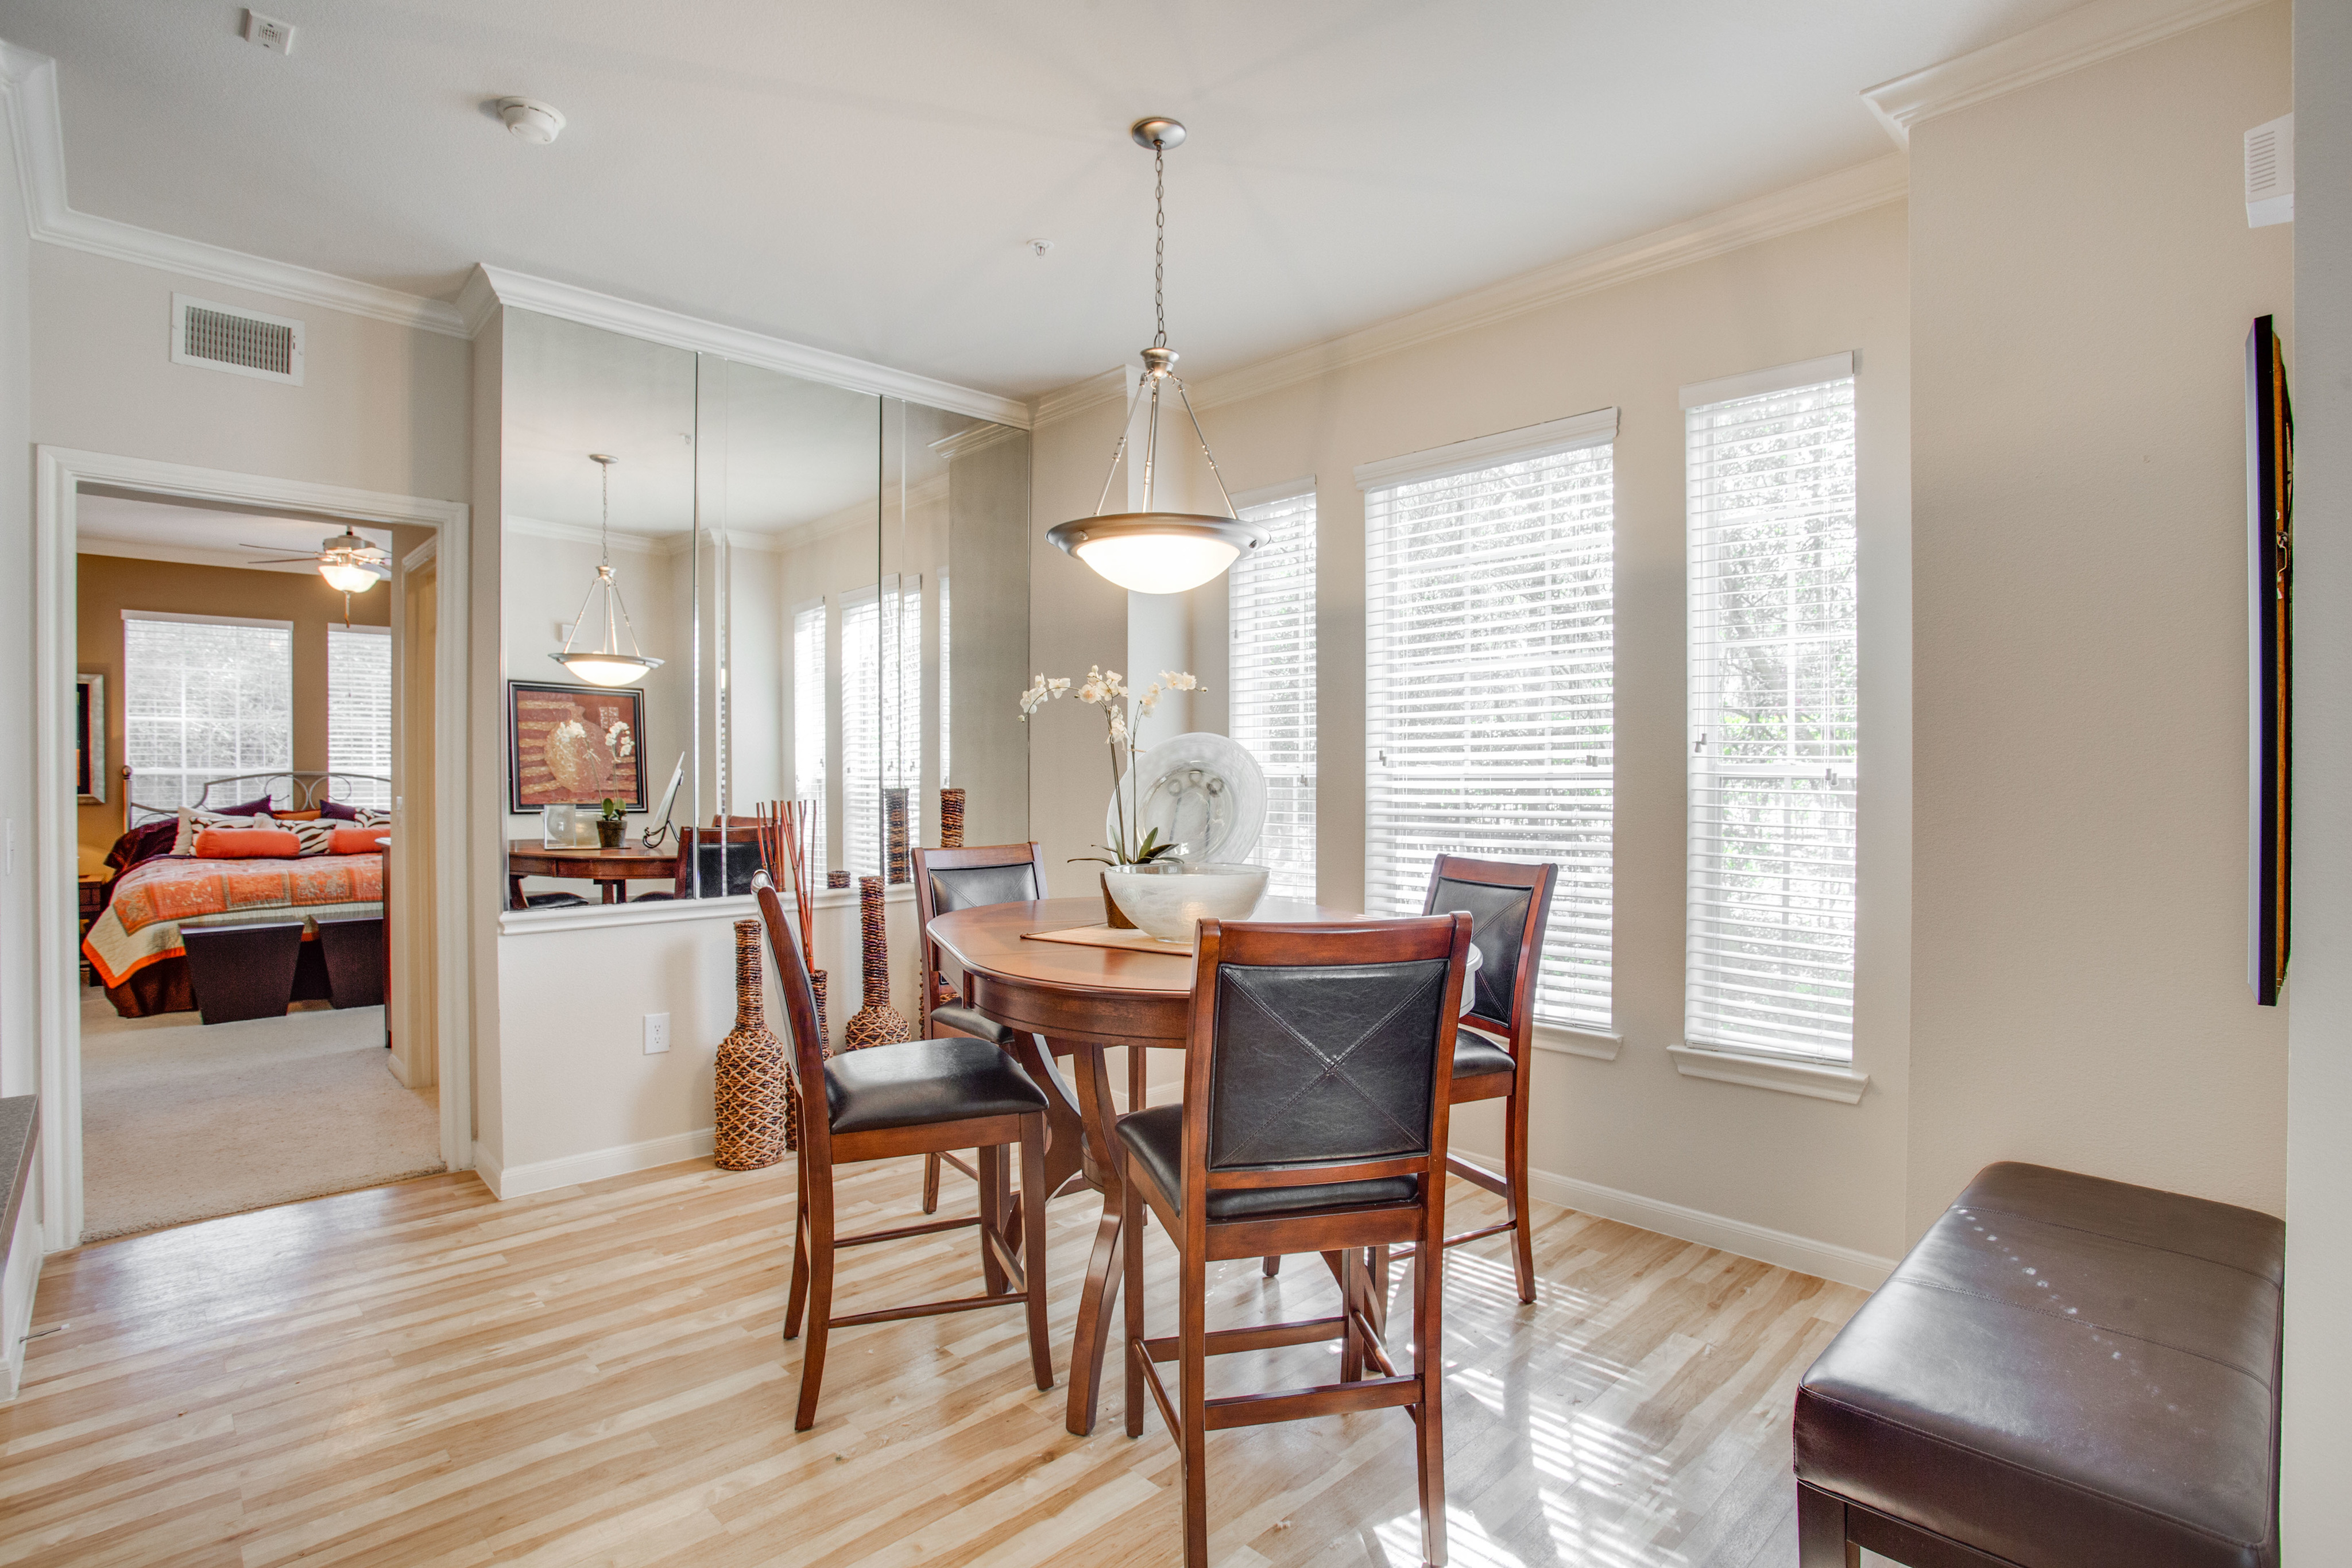 View of Dining Area with Hanging Light, Plank-Wood Flooring, and Décor at Raveneaux Apartments